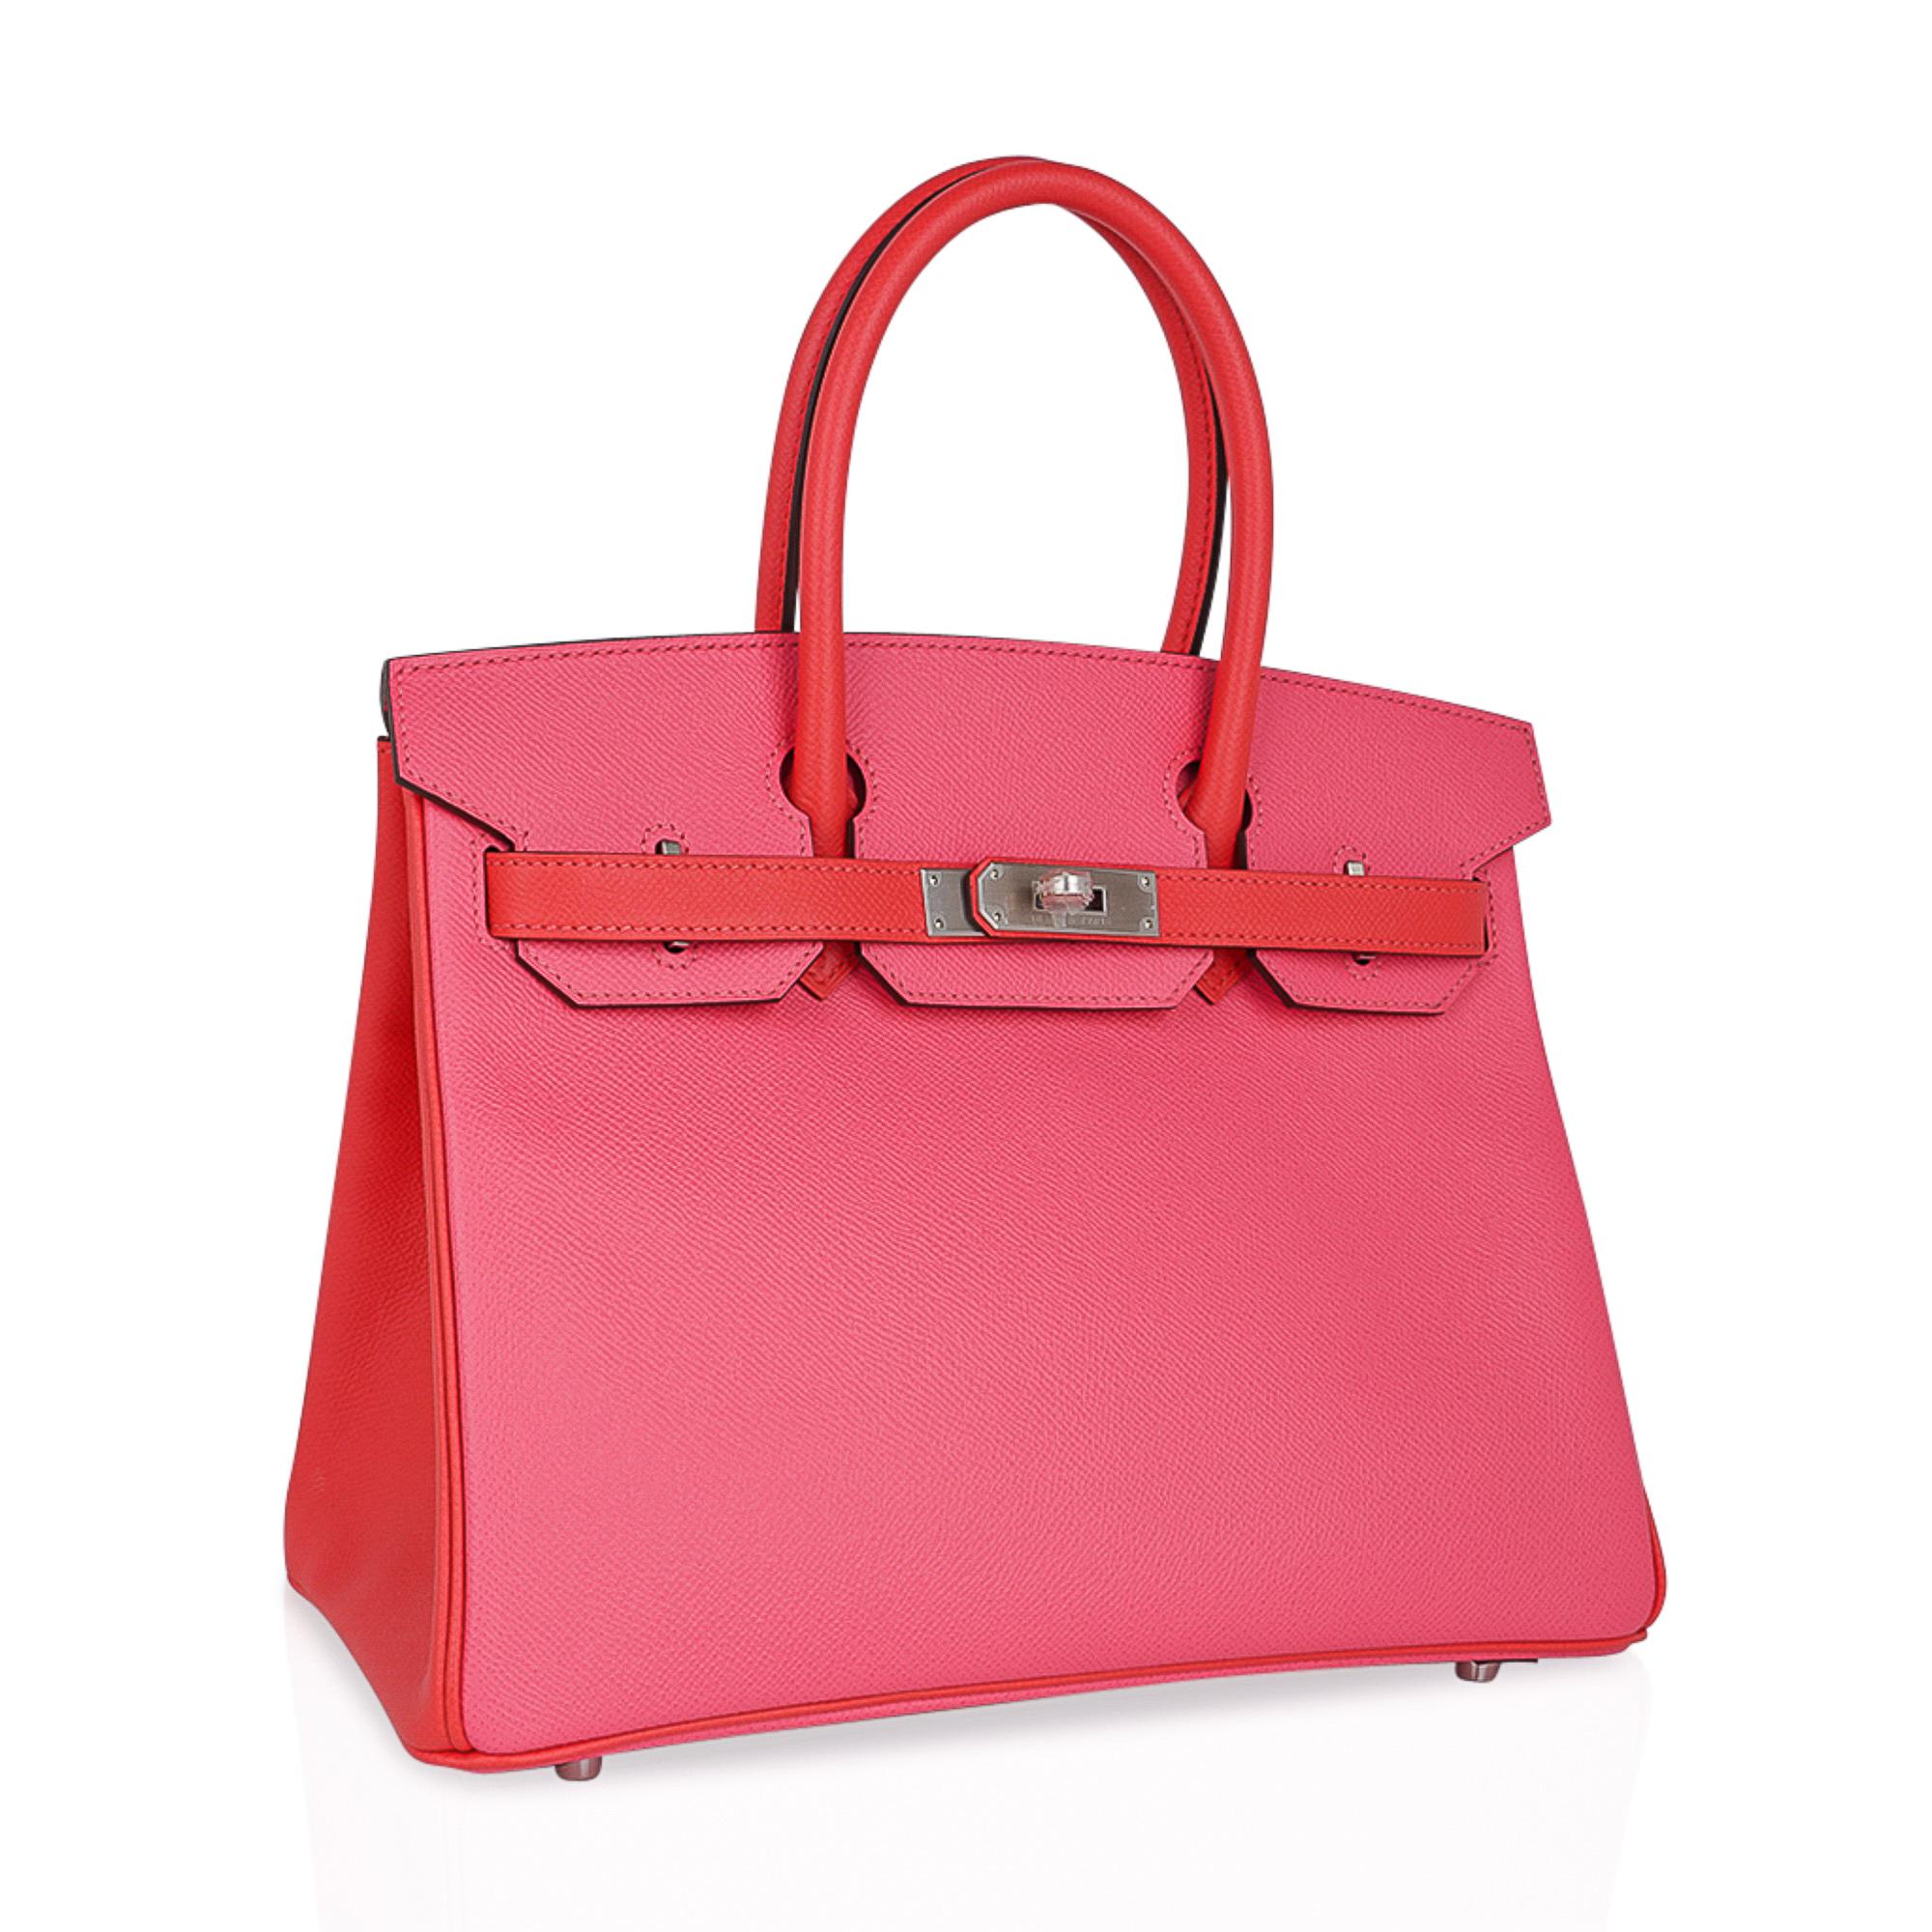 Mightychic offers an Hermes Birkin 30 HSS special order bag featured in coveted Rose Azalee and Rose Jaipur.
Vivid pop all grown up pinks. Gorgeous soft tones tones of pink creates a beautiful bag. 
Brushed palladium hardware.
Comes with signature